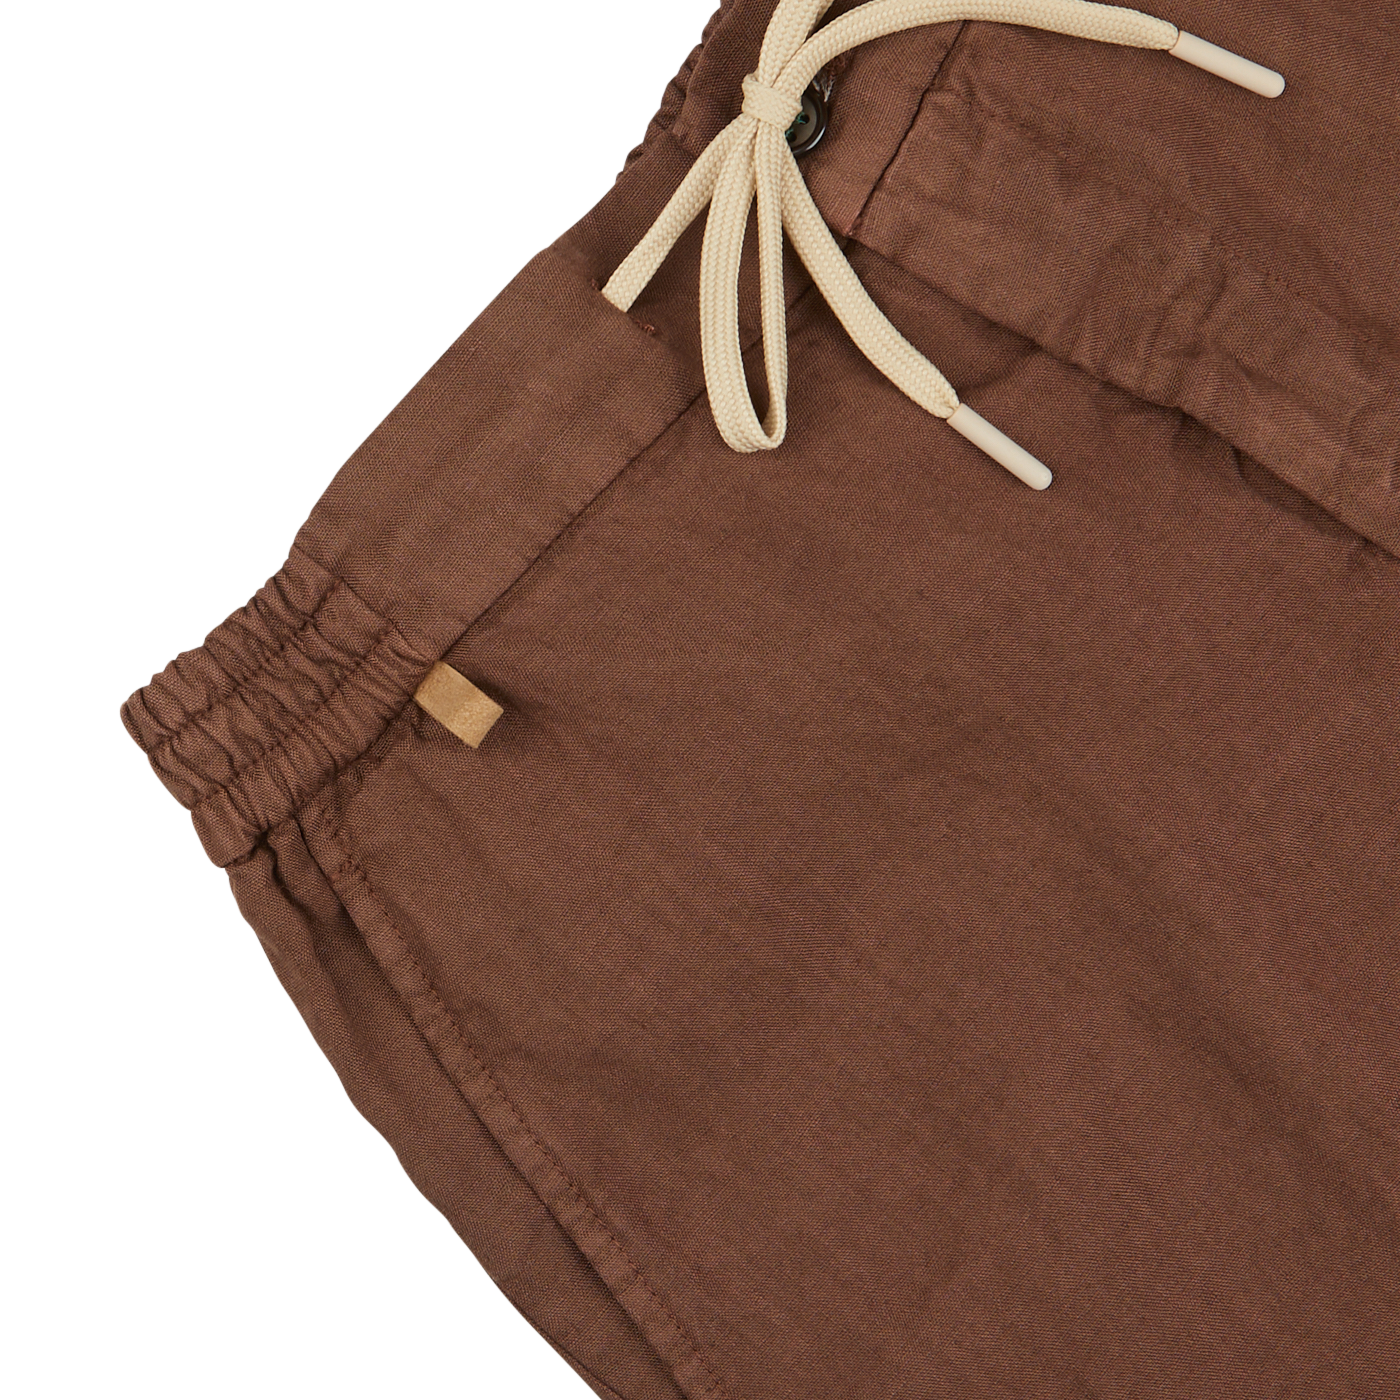 Close-up view of Berwich Terra Brown Washed Linen Drawstring Shorts with elastic waistband and beige drawstrings, on a white background.